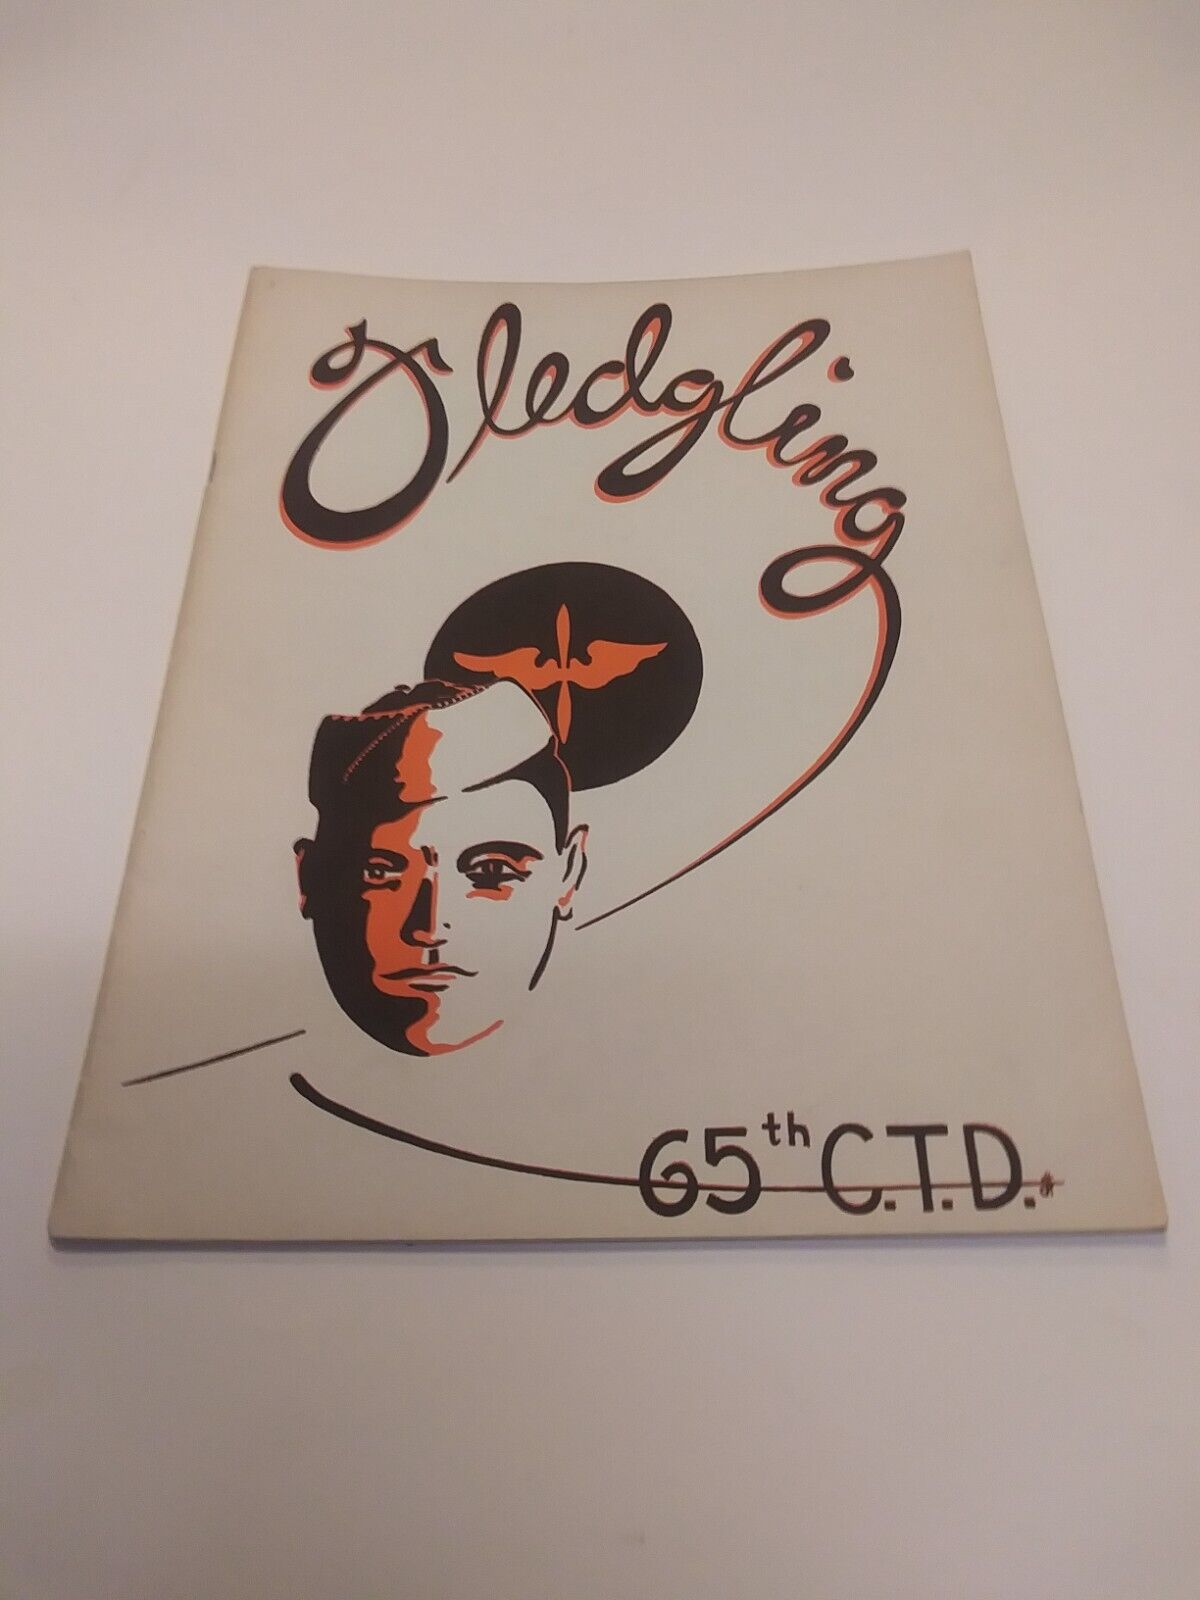 1943 The Fledgling 65th C.T.D. Syracuse University Aviation Students Book